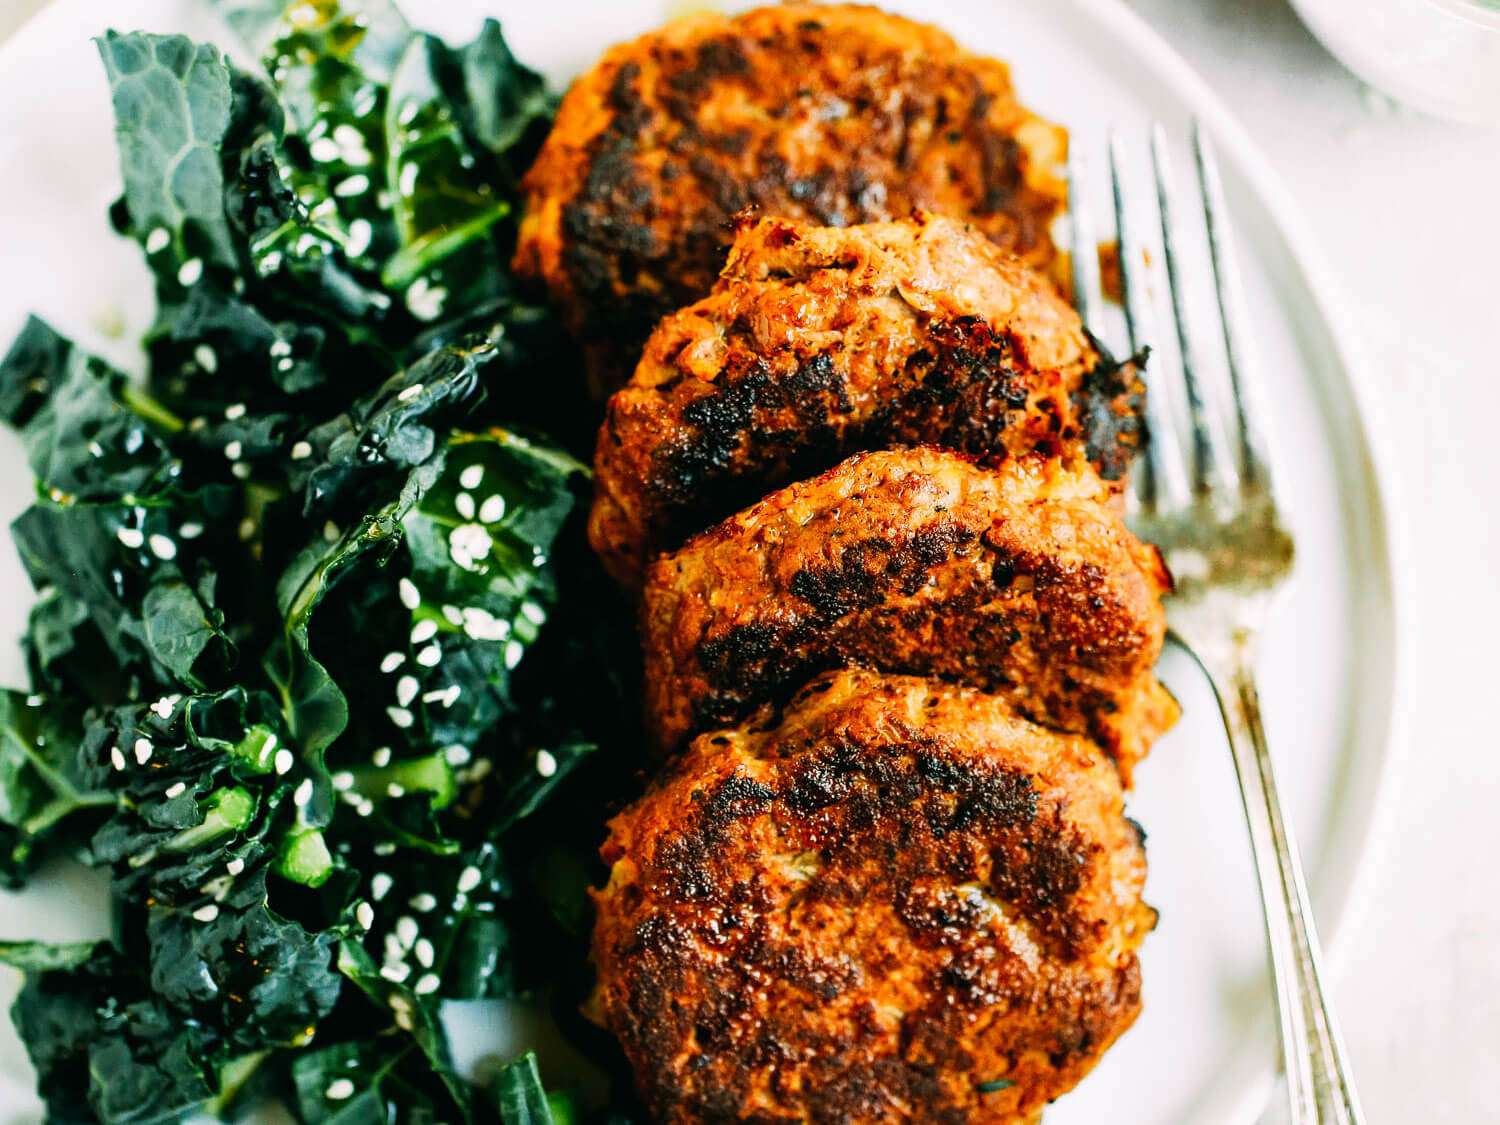 Must add to the menu this week! Healthy, whole30, and paleo friendly wild tuna cakes made with low mercury chili lime tuna.Easy Whole30 recipes. Best paleo shopping guide. Easy whole30 lunch recipes. Easy whole30 lunch ideas. Whole30 lunch recipes. Best whole30 lunch recipes. Easy whole30 lunch recipes. Healthy whole30 breakfast recipes. Easy whole30 dinner ideas.